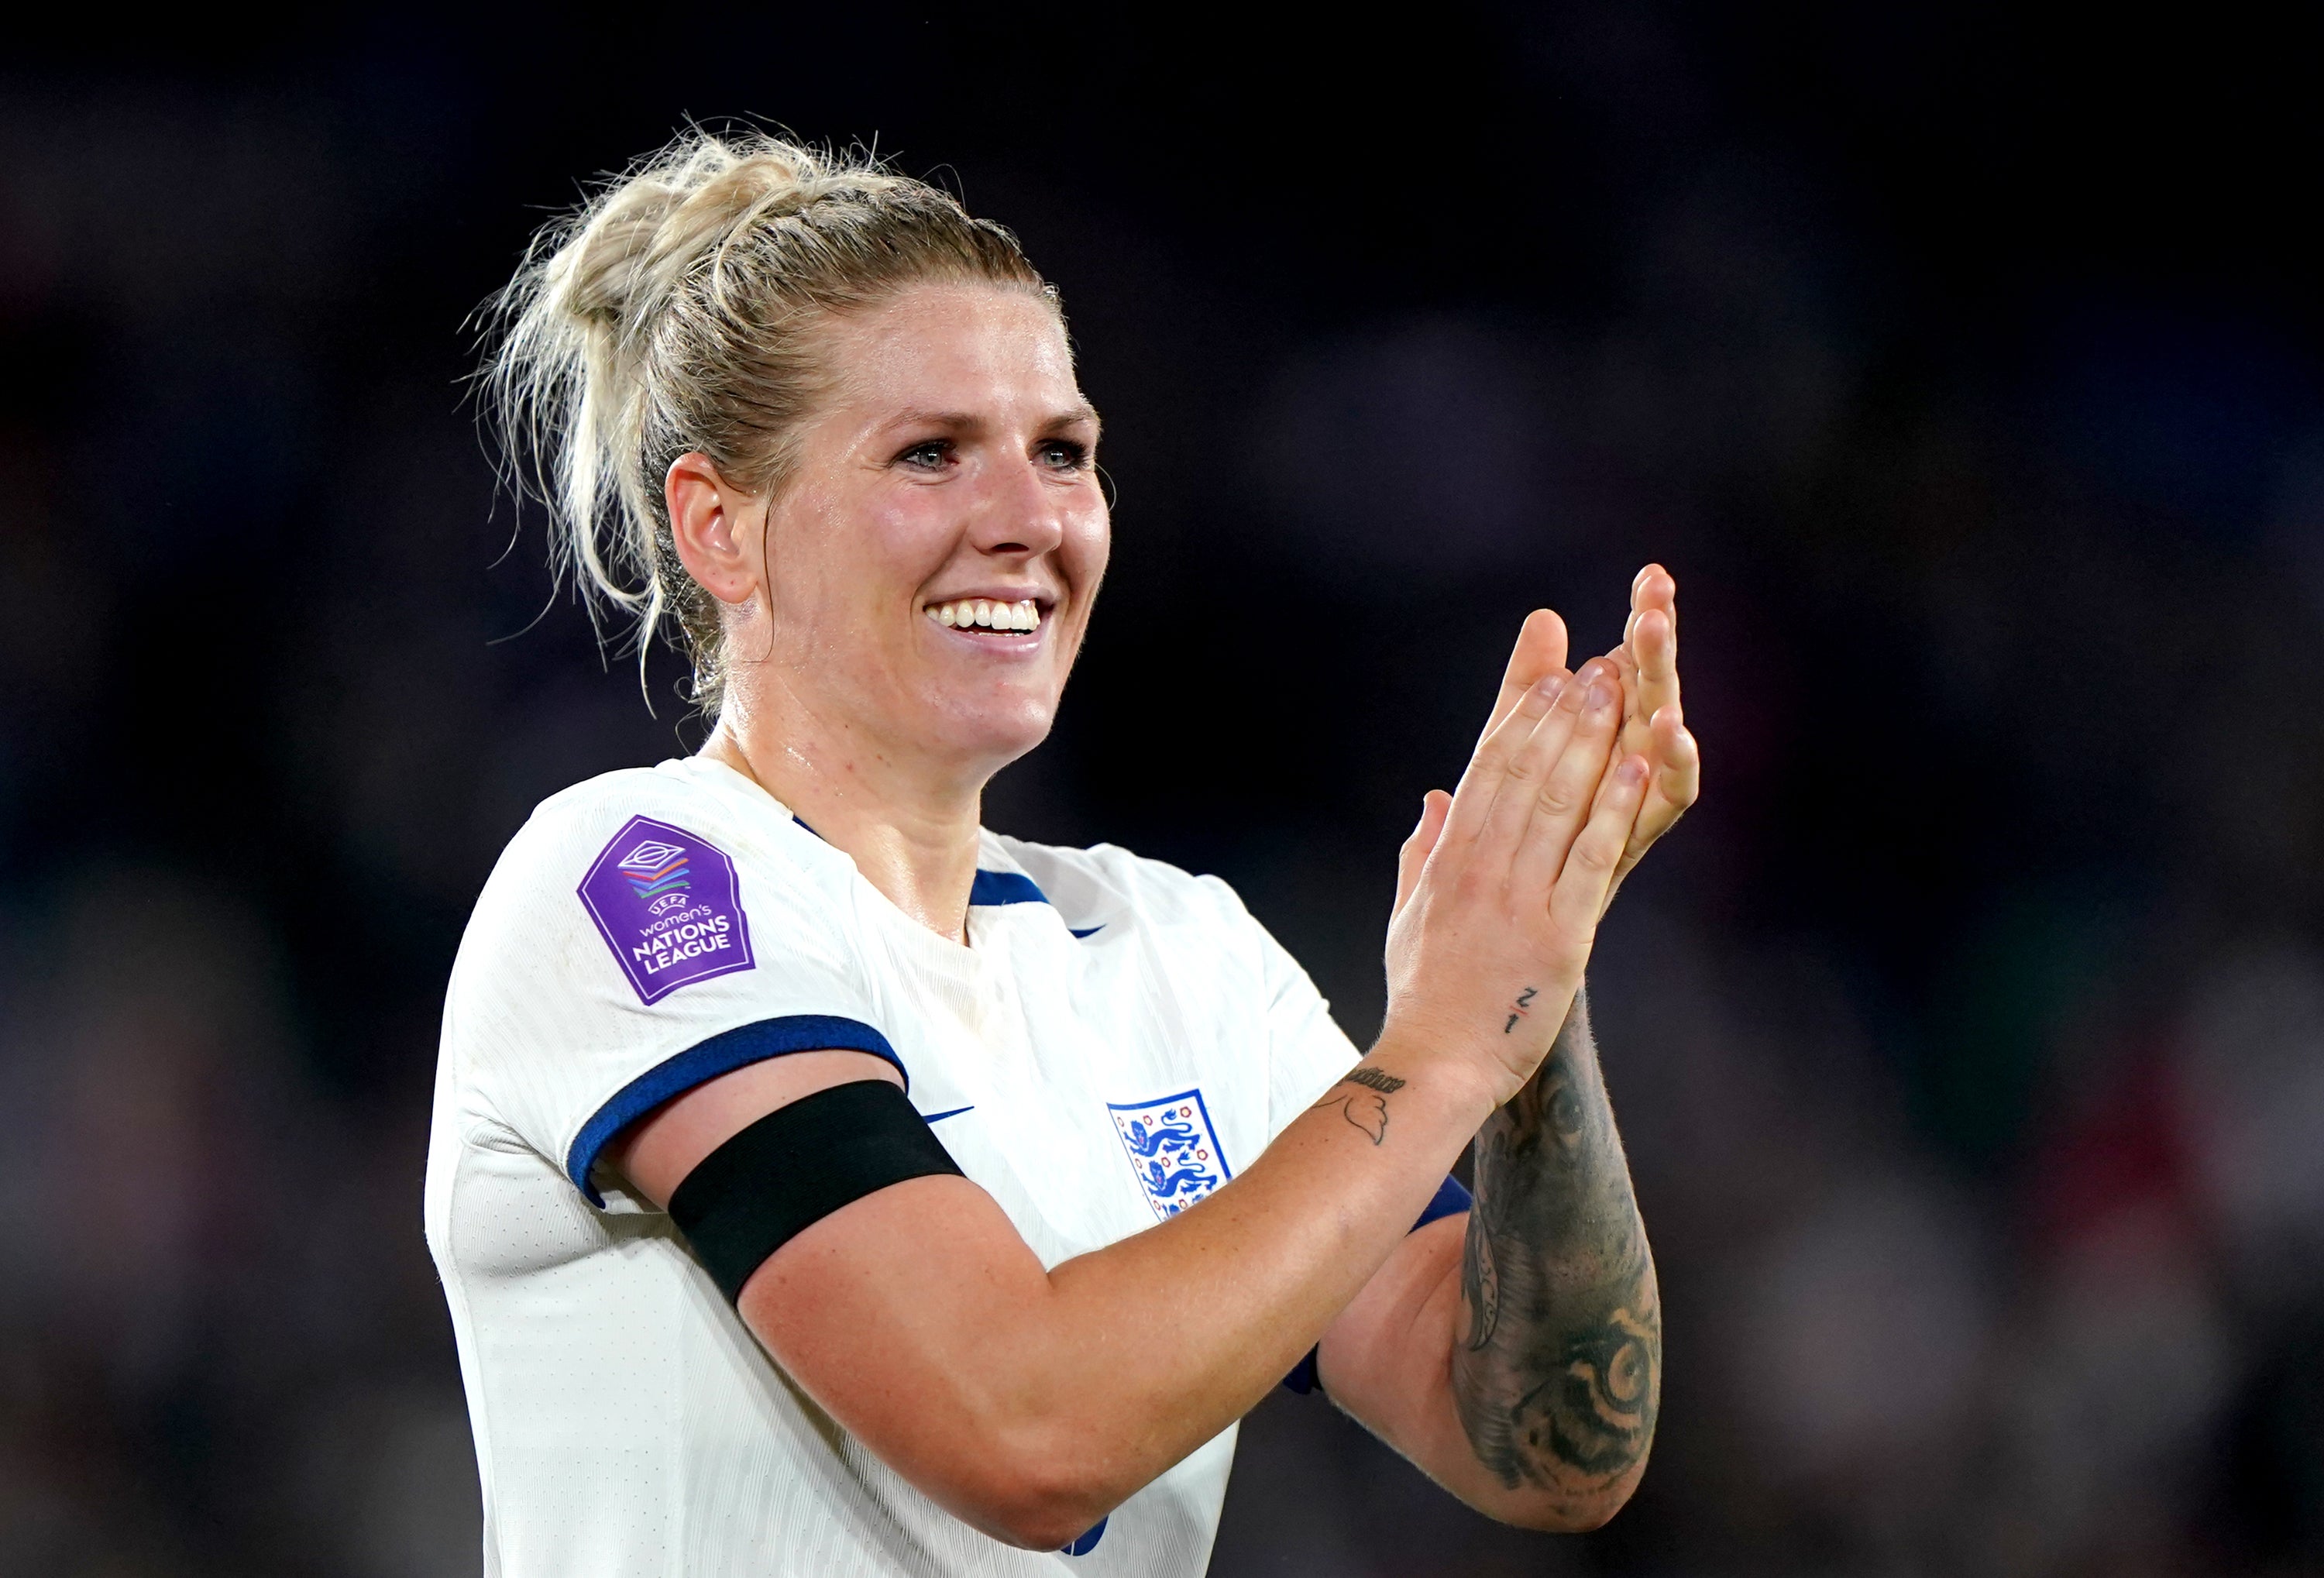 Millie Bright has returned to the Lionesses squad after injury